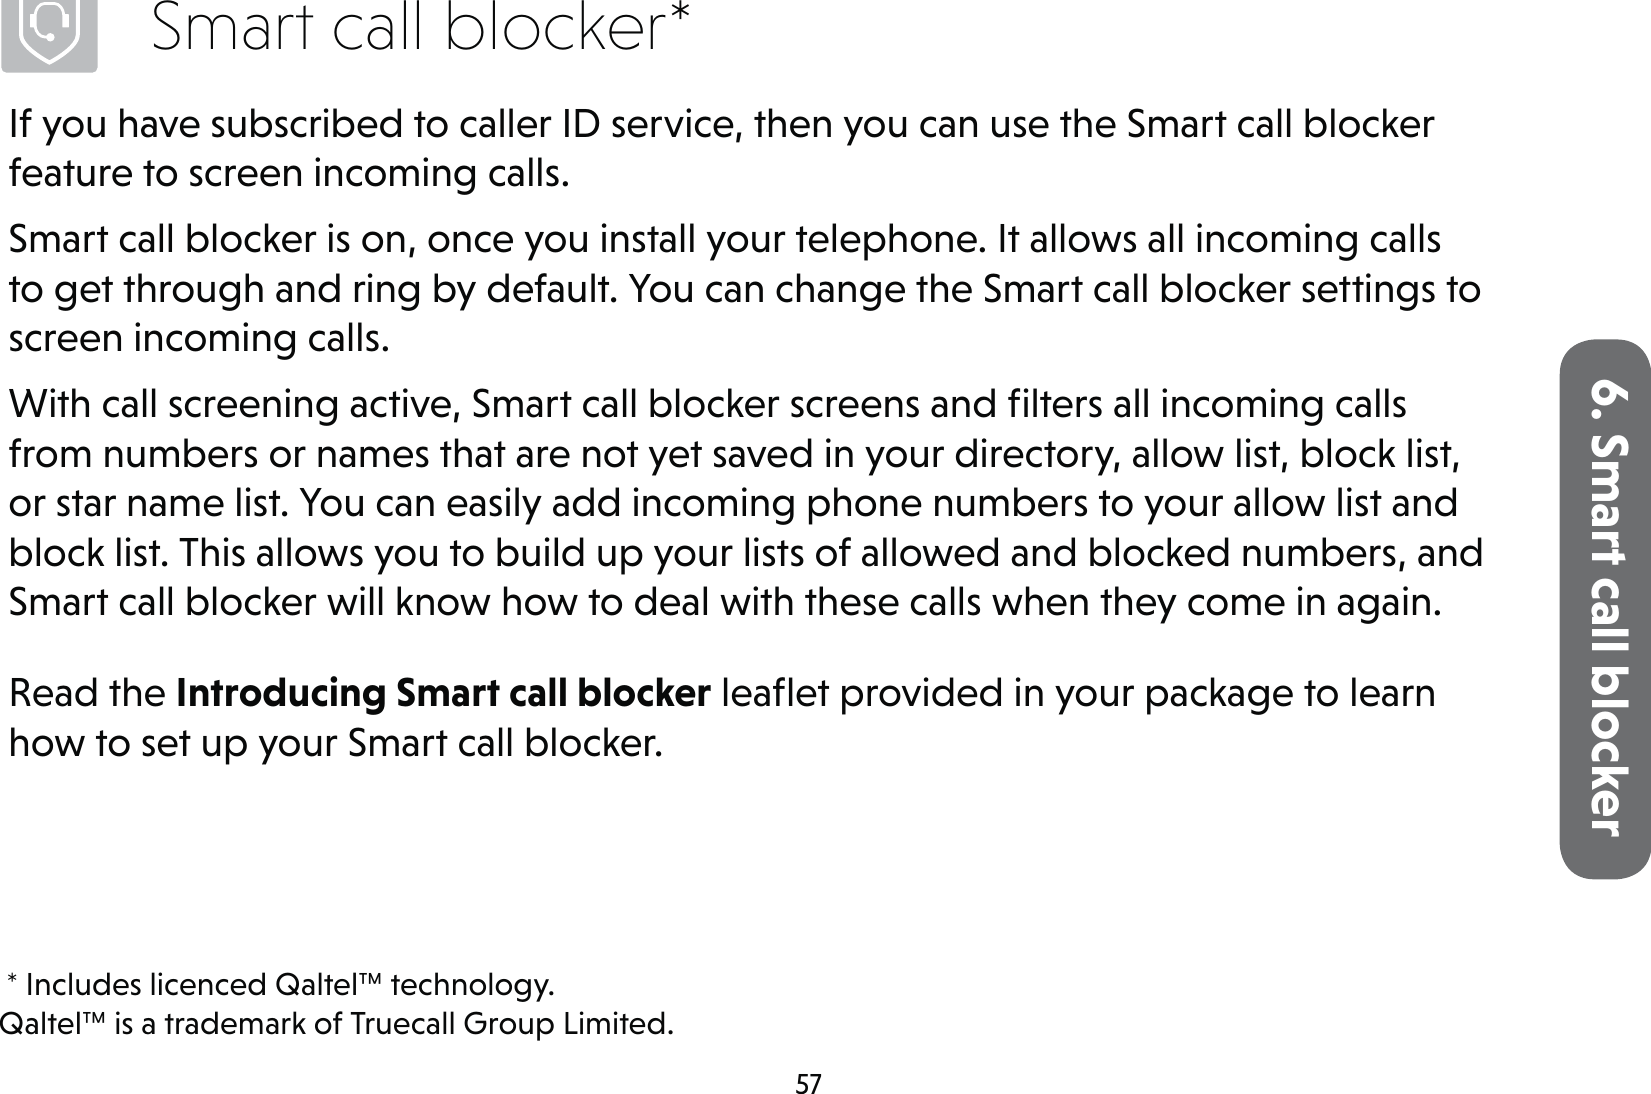 576. Smart call blockerSmart call blocker*If you have subscribed to caller ID service, then you can use the Smart call blocker feature to screen incoming calls.Smart call blocker is on, once you install your telephone. It allows all incoming calls to get through and ring by default. You can change the Smart call blocker settings to screen incoming calls.With call screening active, Smart call blocker screens and ﬁlters all incoming calls from numbers or names that are not yet saved in your directory, allow list, block list, or star name list. You can easily add incoming phone numbers to your allow list and block list. This allows you to build up your lists of allowed and blocked numbers, and Smart call blocker will know how to deal with these calls when they come in again.Read the Introducing Smart call blocker leaﬂet provided in your package to learn how to set up your Smart call blocker. * Includes licenced Qaltel™ technology.Qaltel™ is a trademark of Truecall Group Limited.